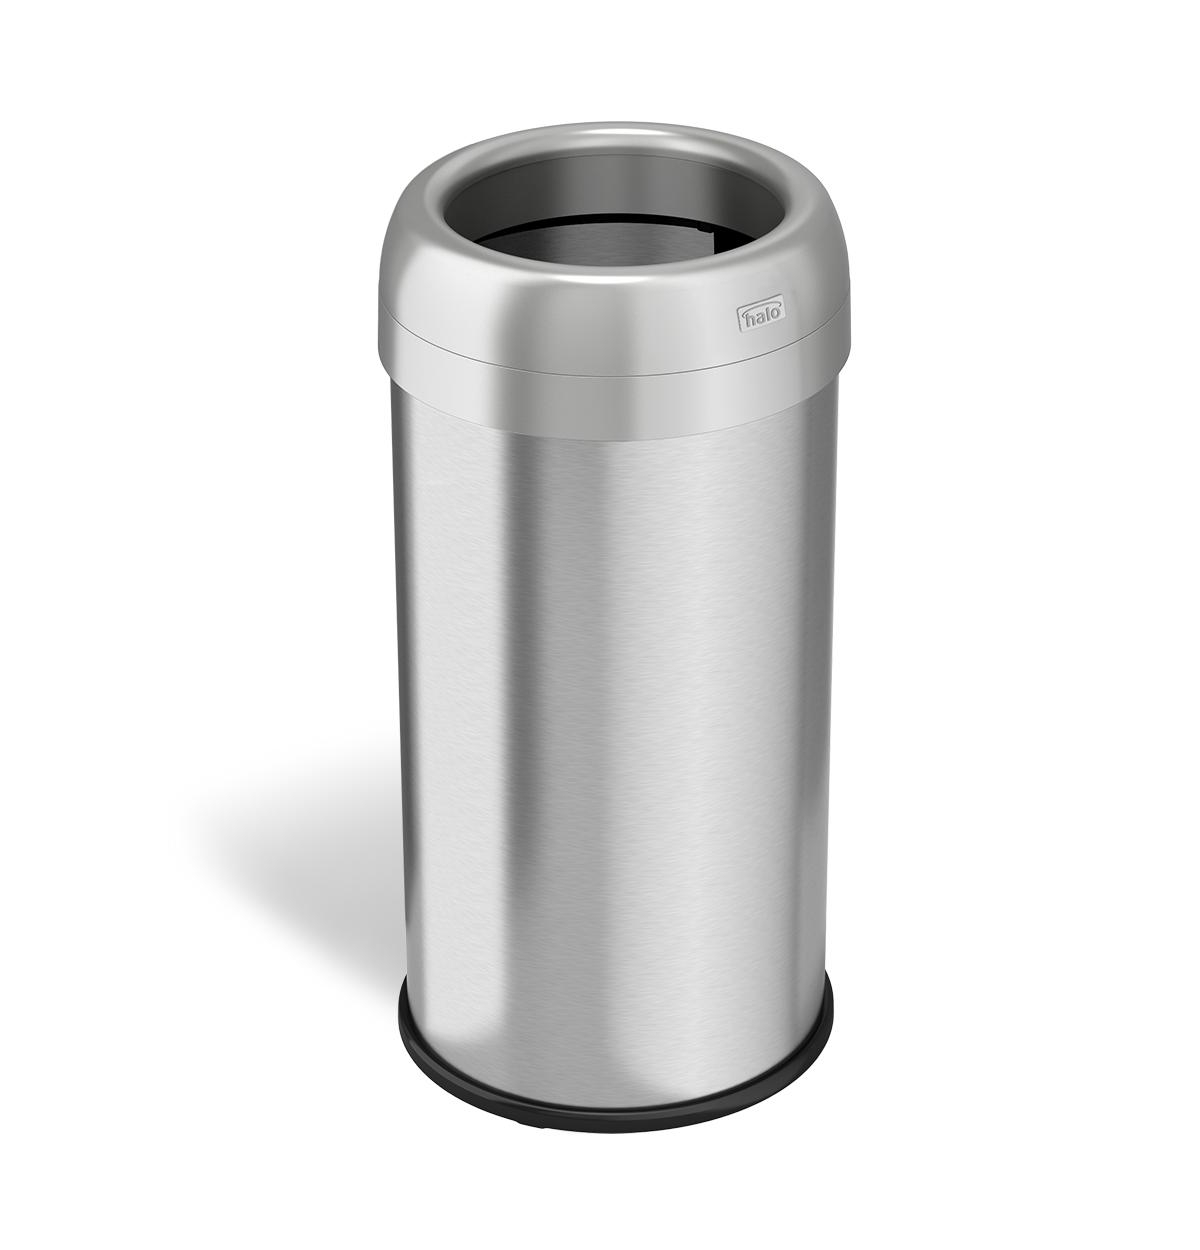 Dual Deodorizer Round Open Top Stainless Steel Trash Can 16 Gallon - Silver